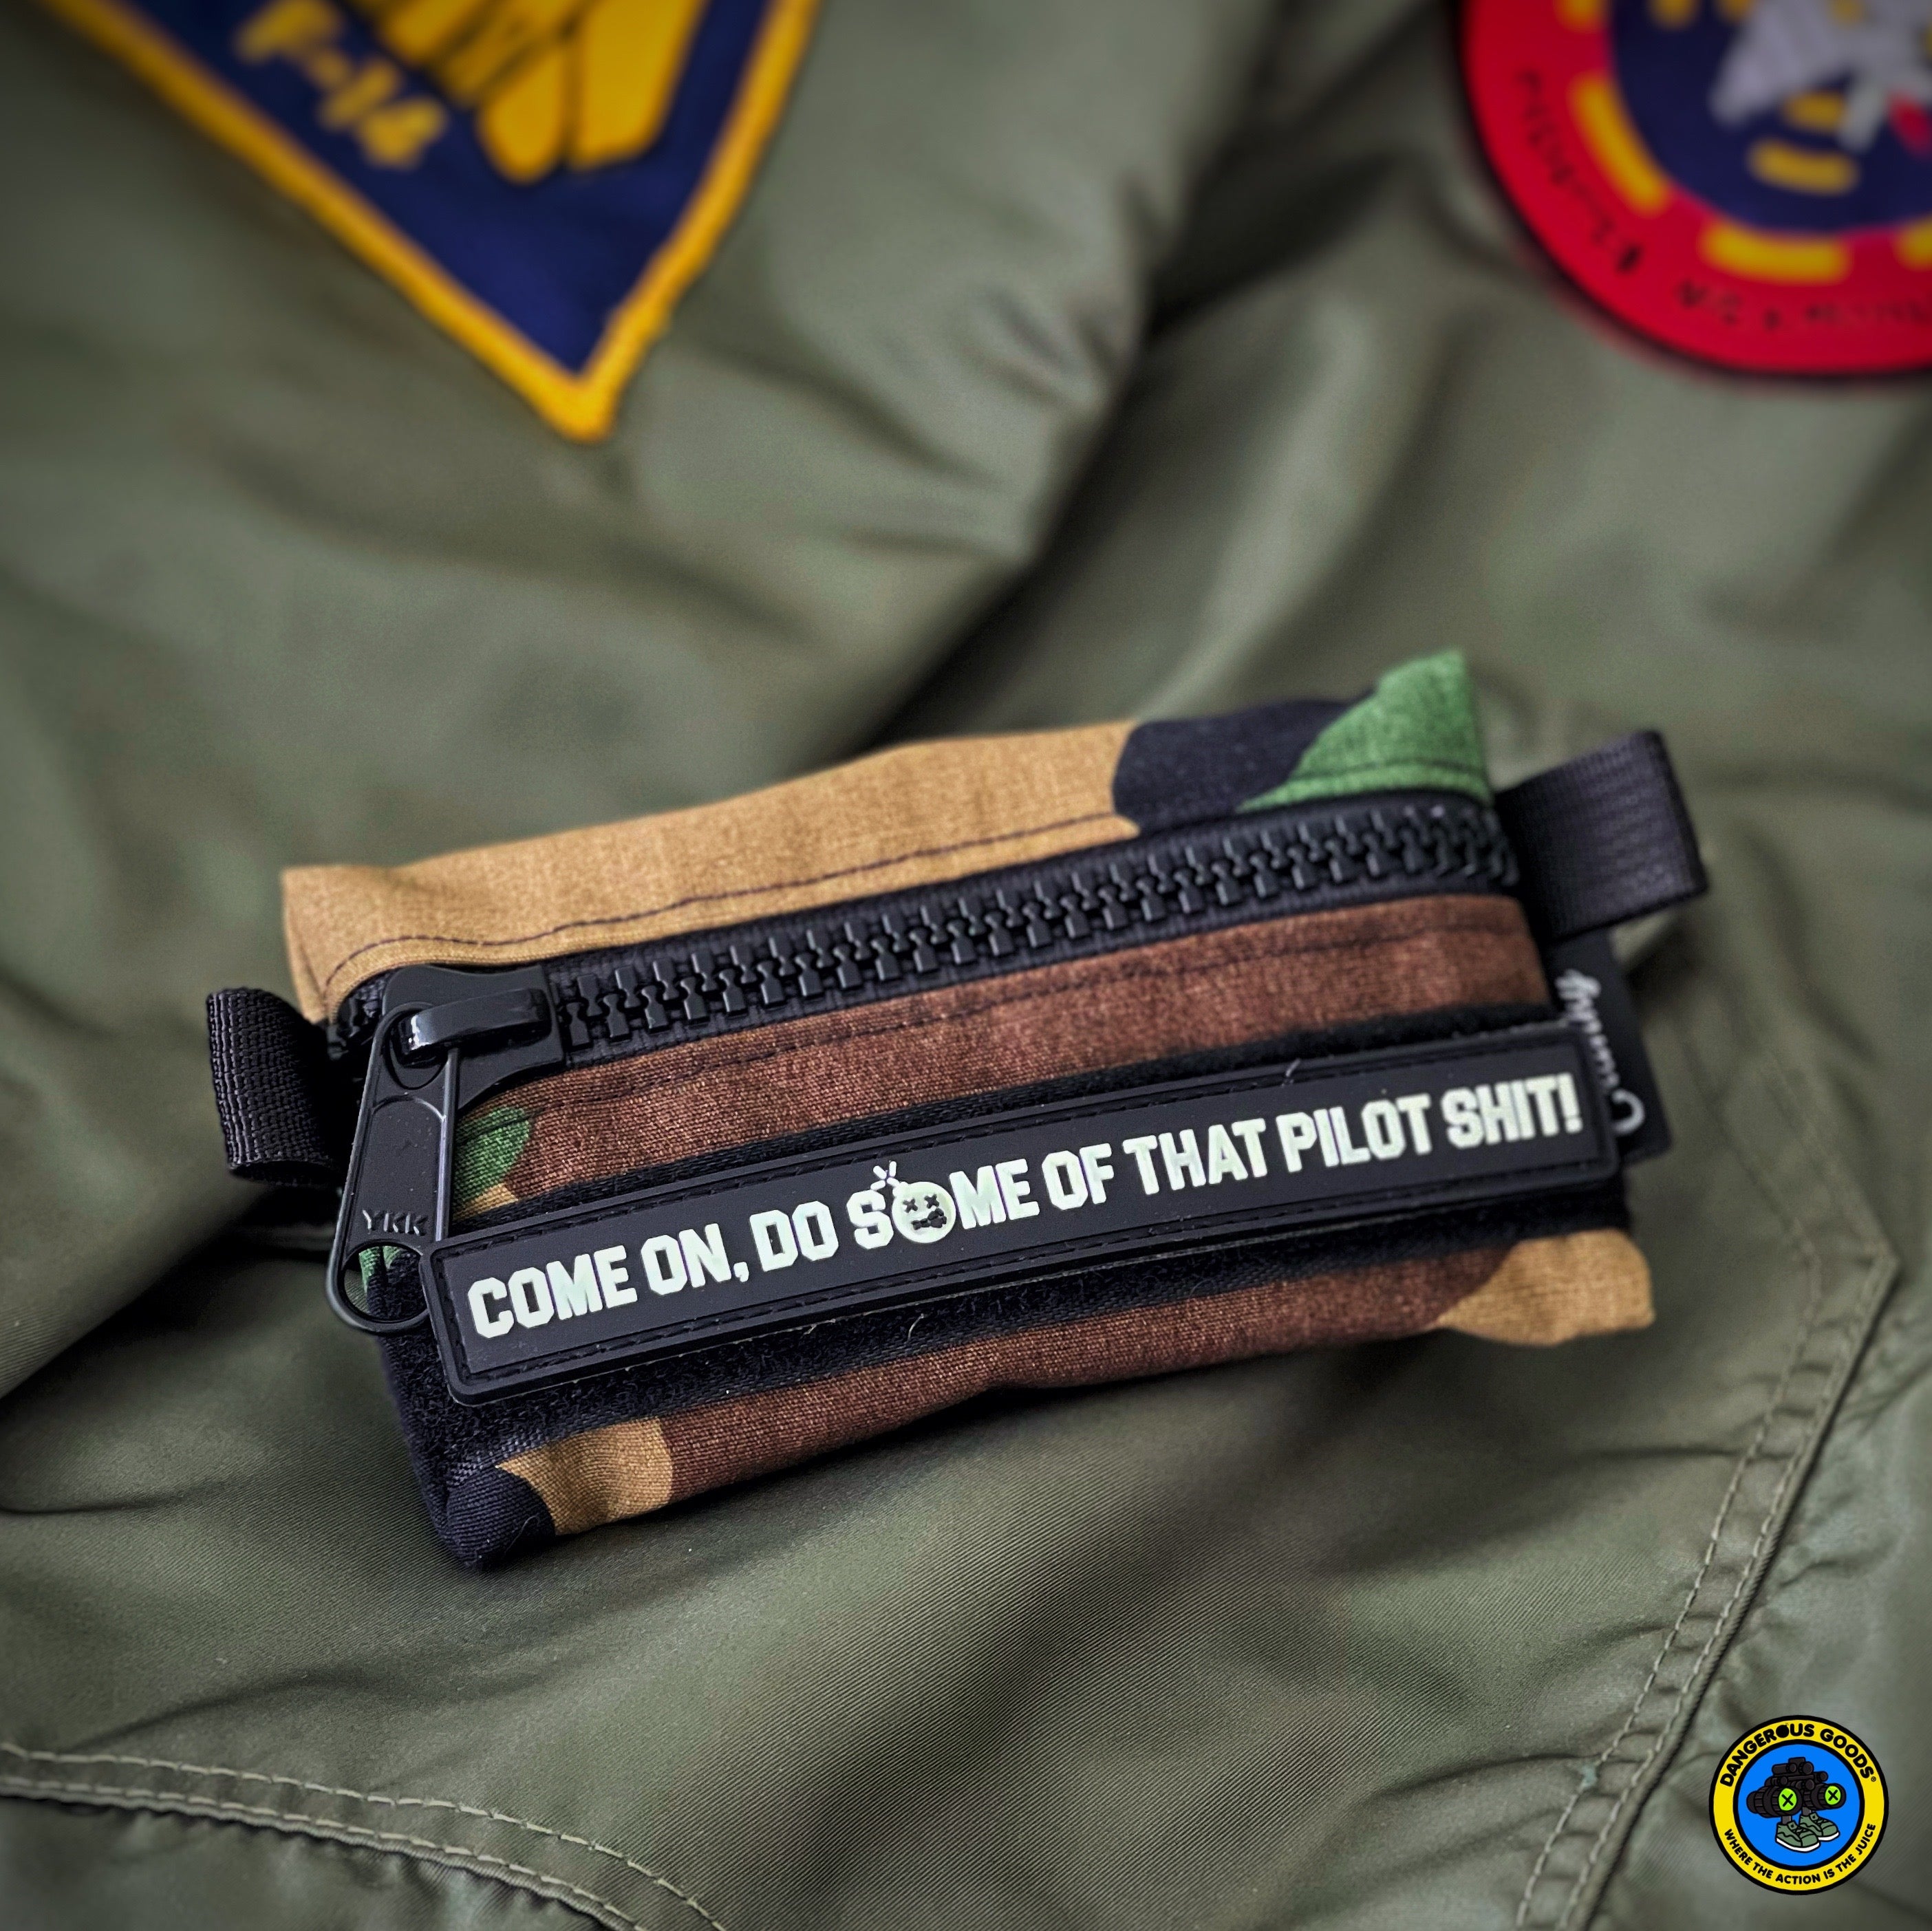 I'm Not A Coward Army Morale Patch